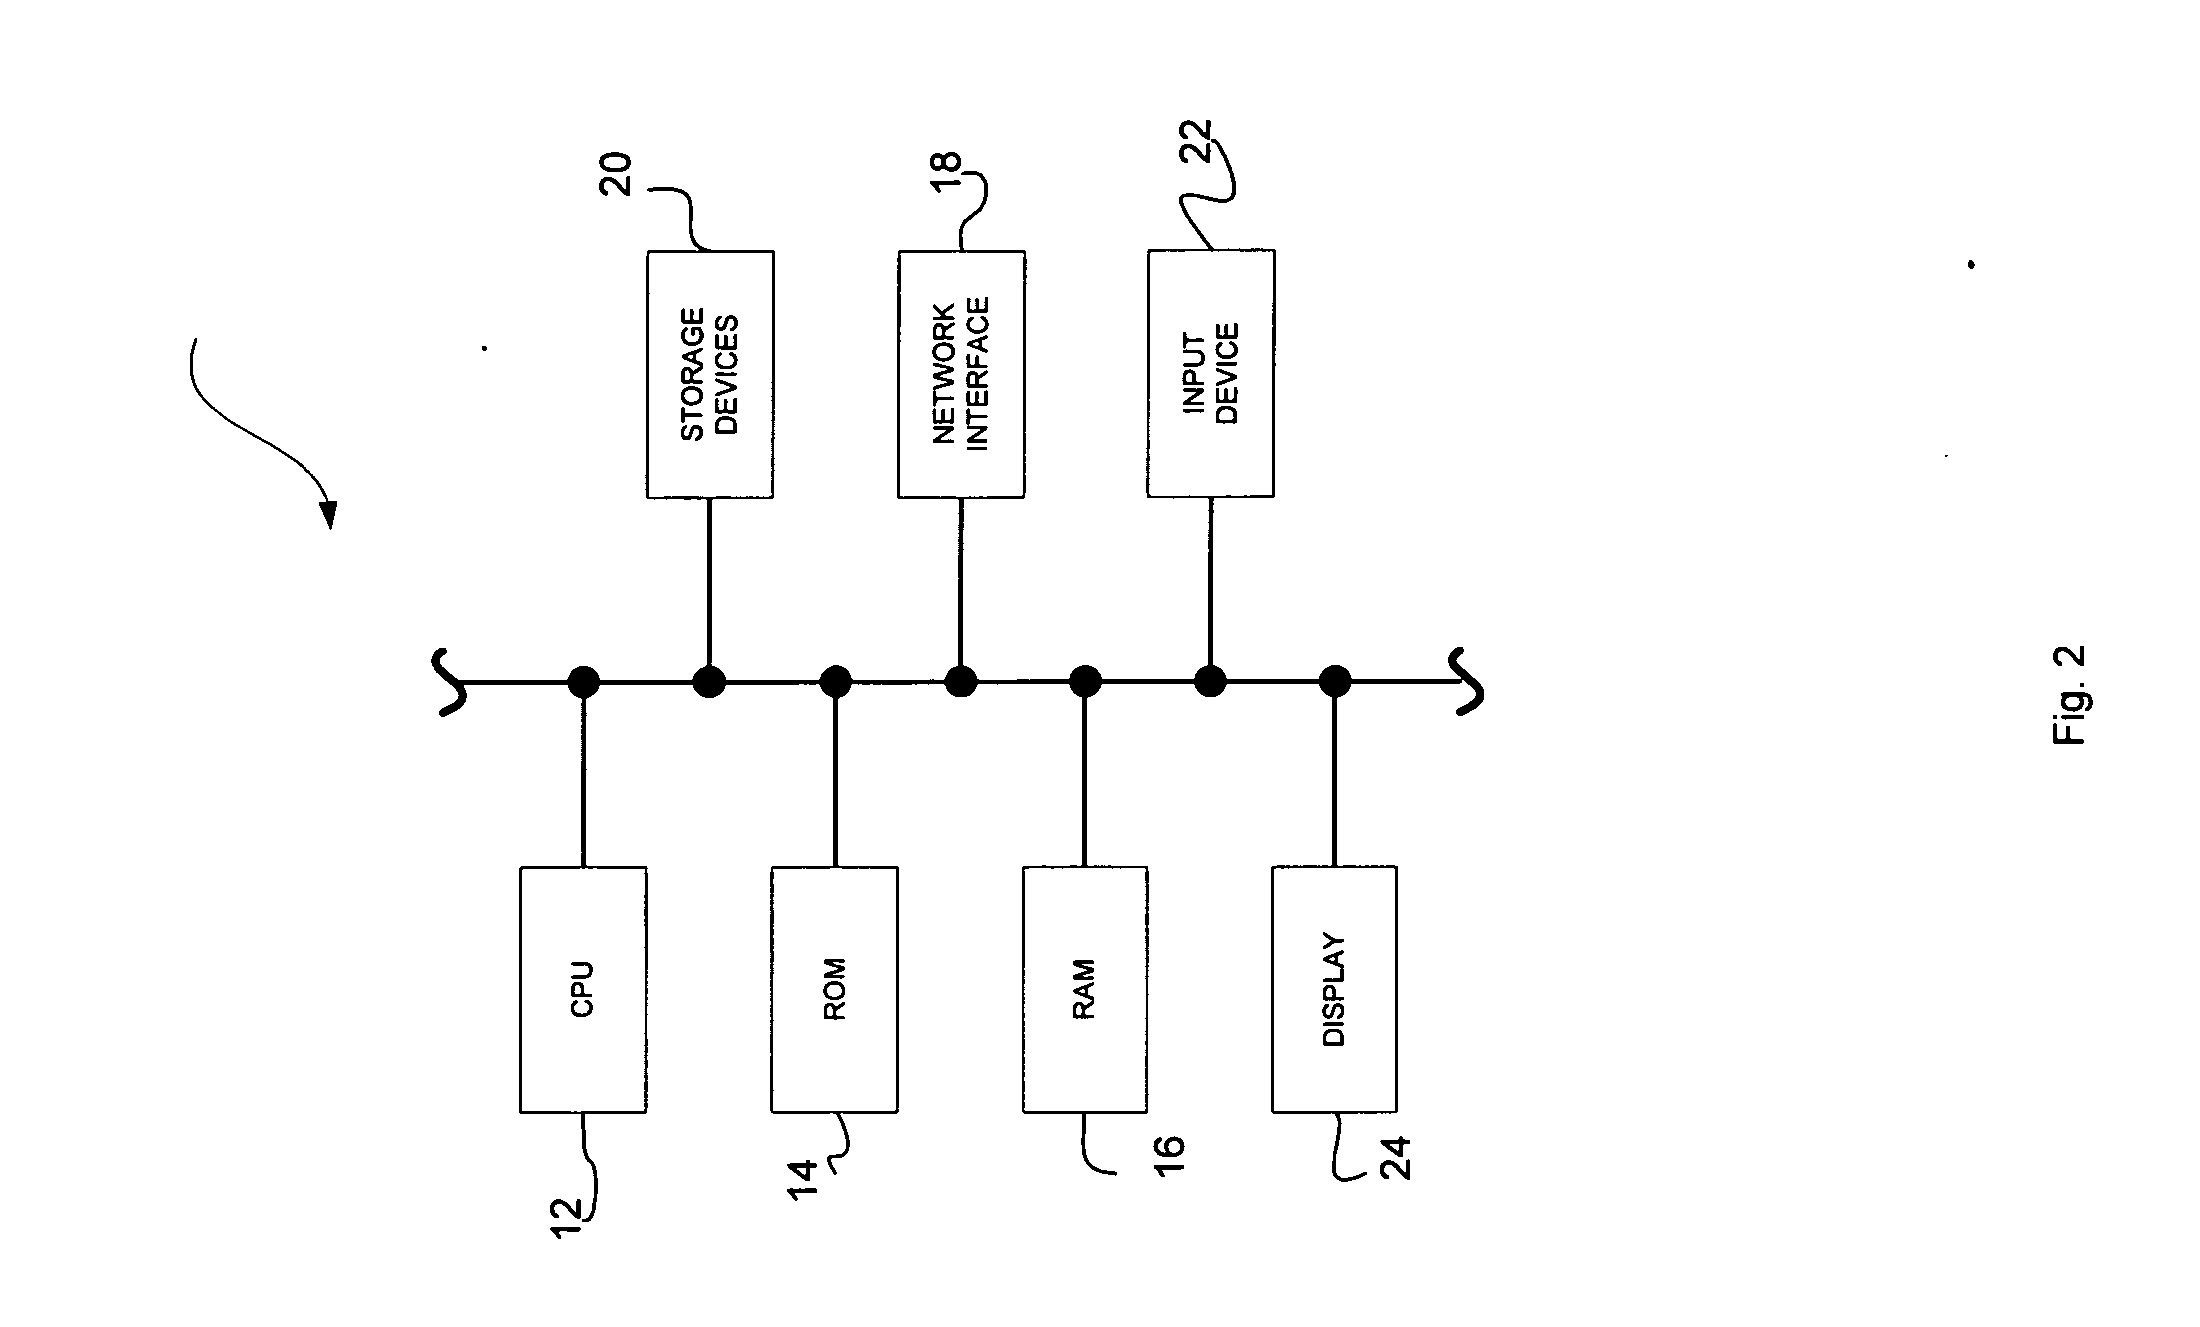 System and method for integrating ancillary data in DICOM image files